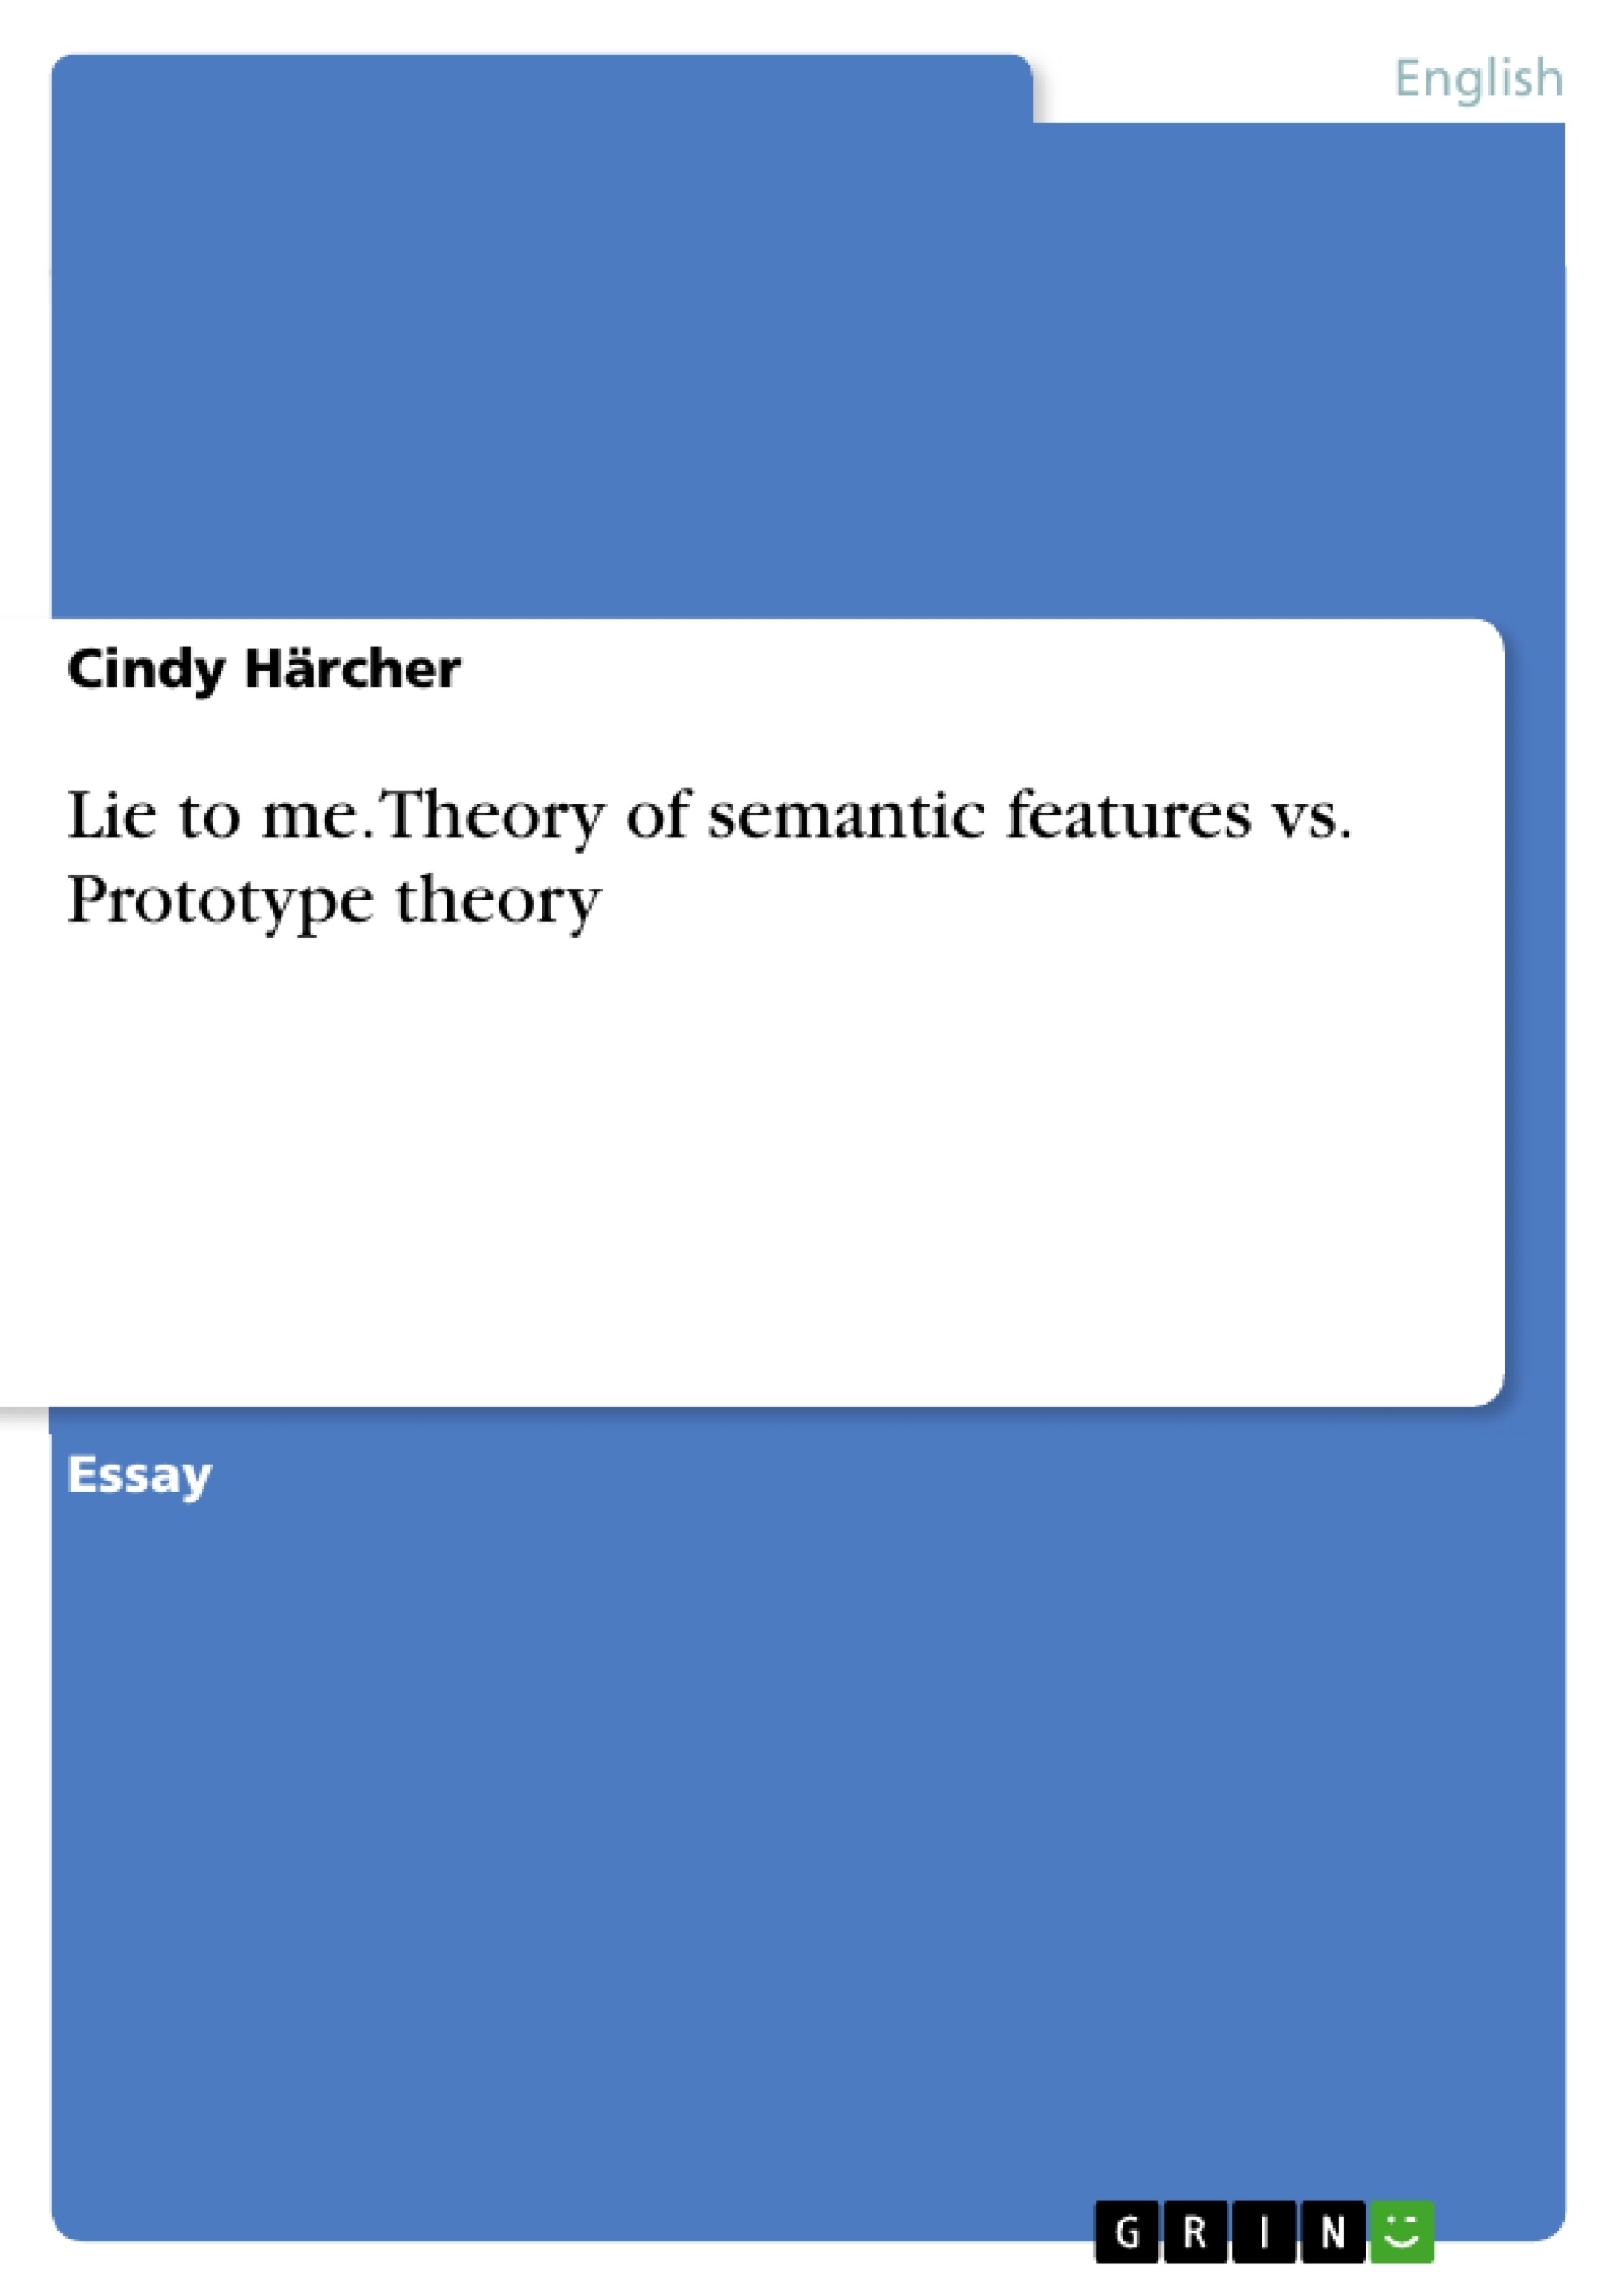 Título: Lie to me. Theory of semantic features vs. Prototype theory